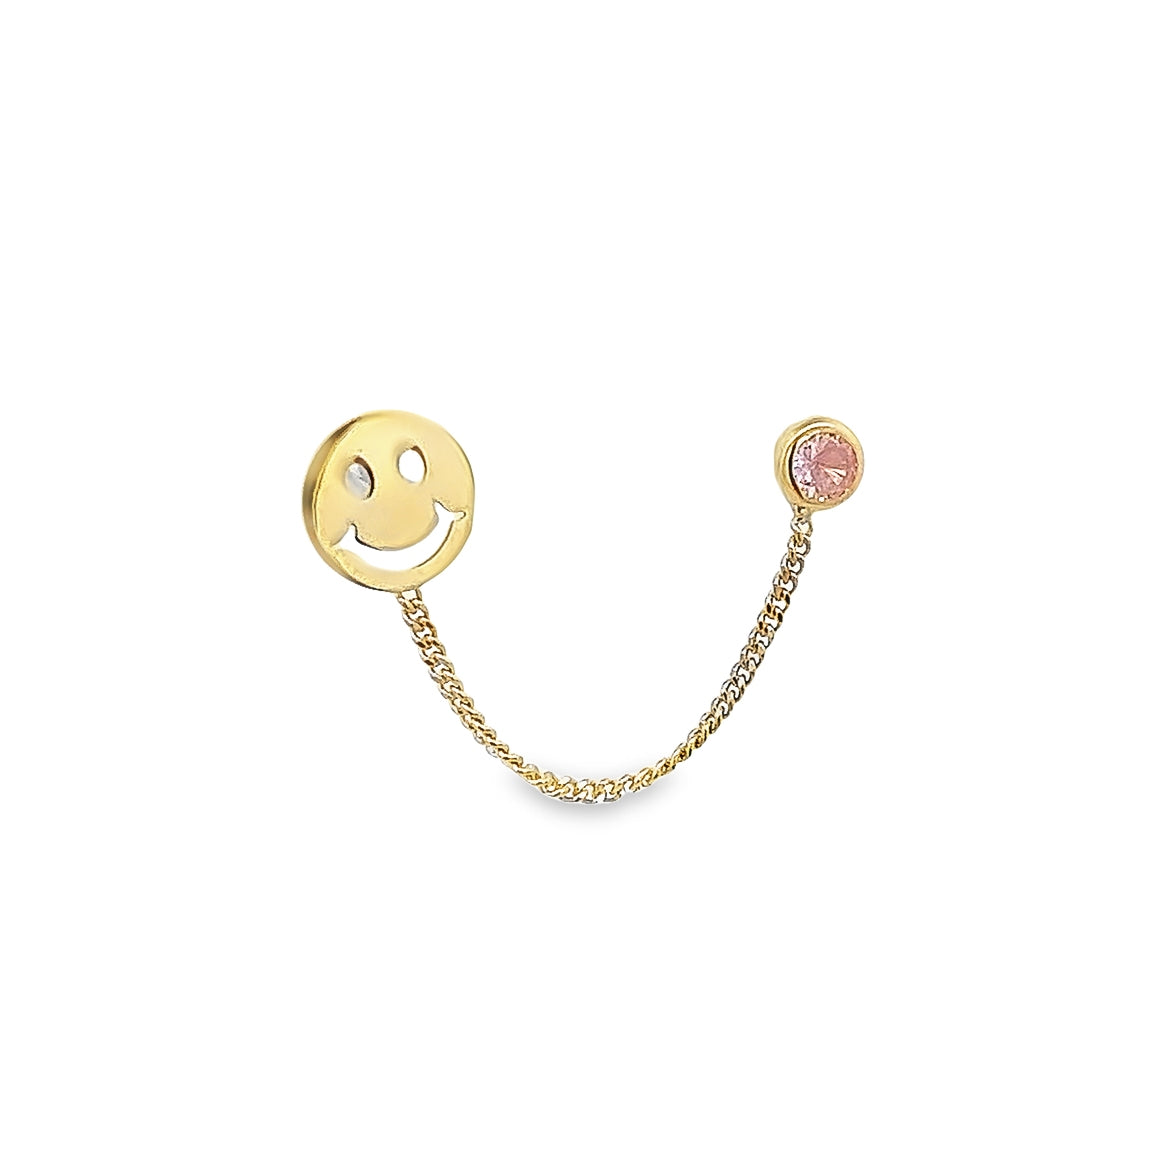 14K GOLD HAPPY FACE AND CRYSTAL CHAIN PIERCING